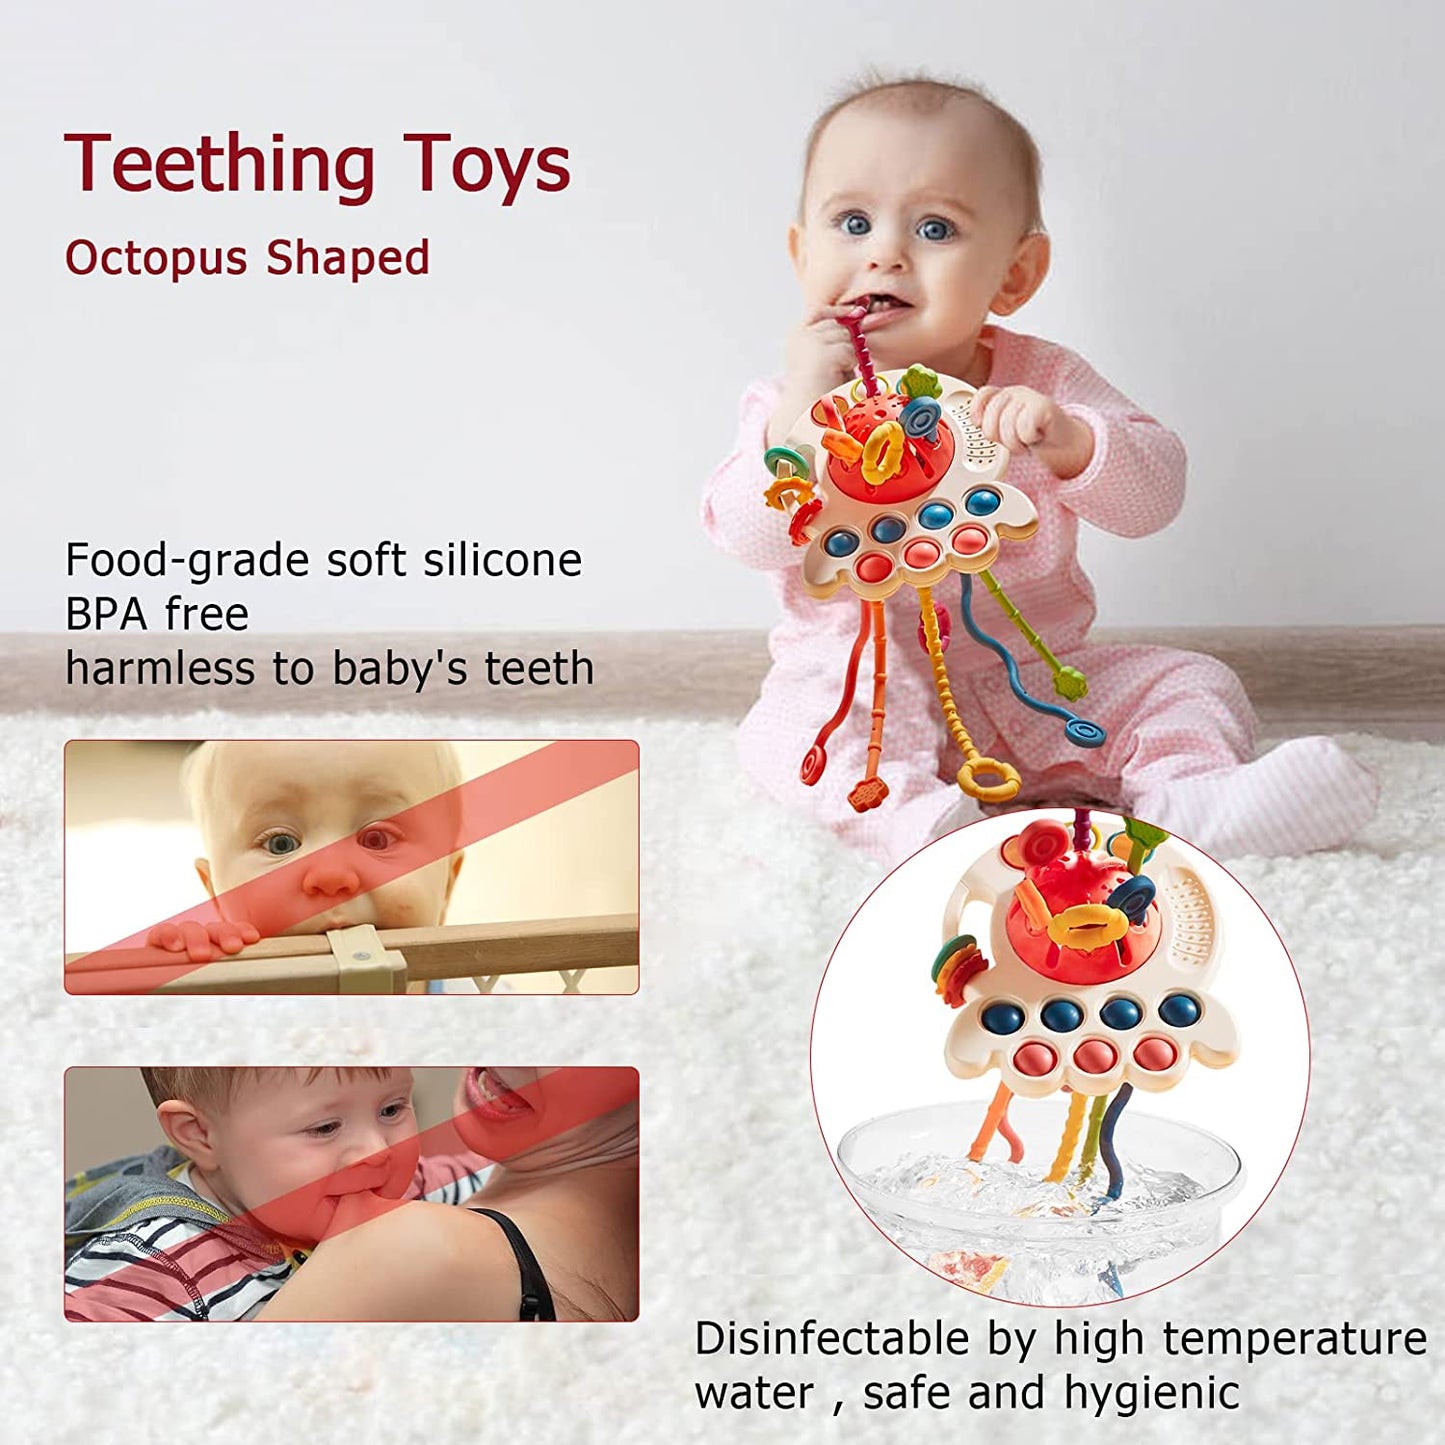 Baby Toys 6 to 12 Months, Sensory & Toys for 1 Year Old, Octopus Pull String Toys, Travel & Teething Toys for Car Seat, Baby Girl Boy Gifts for 6, 9, 12, 18 Months Infant Toddler